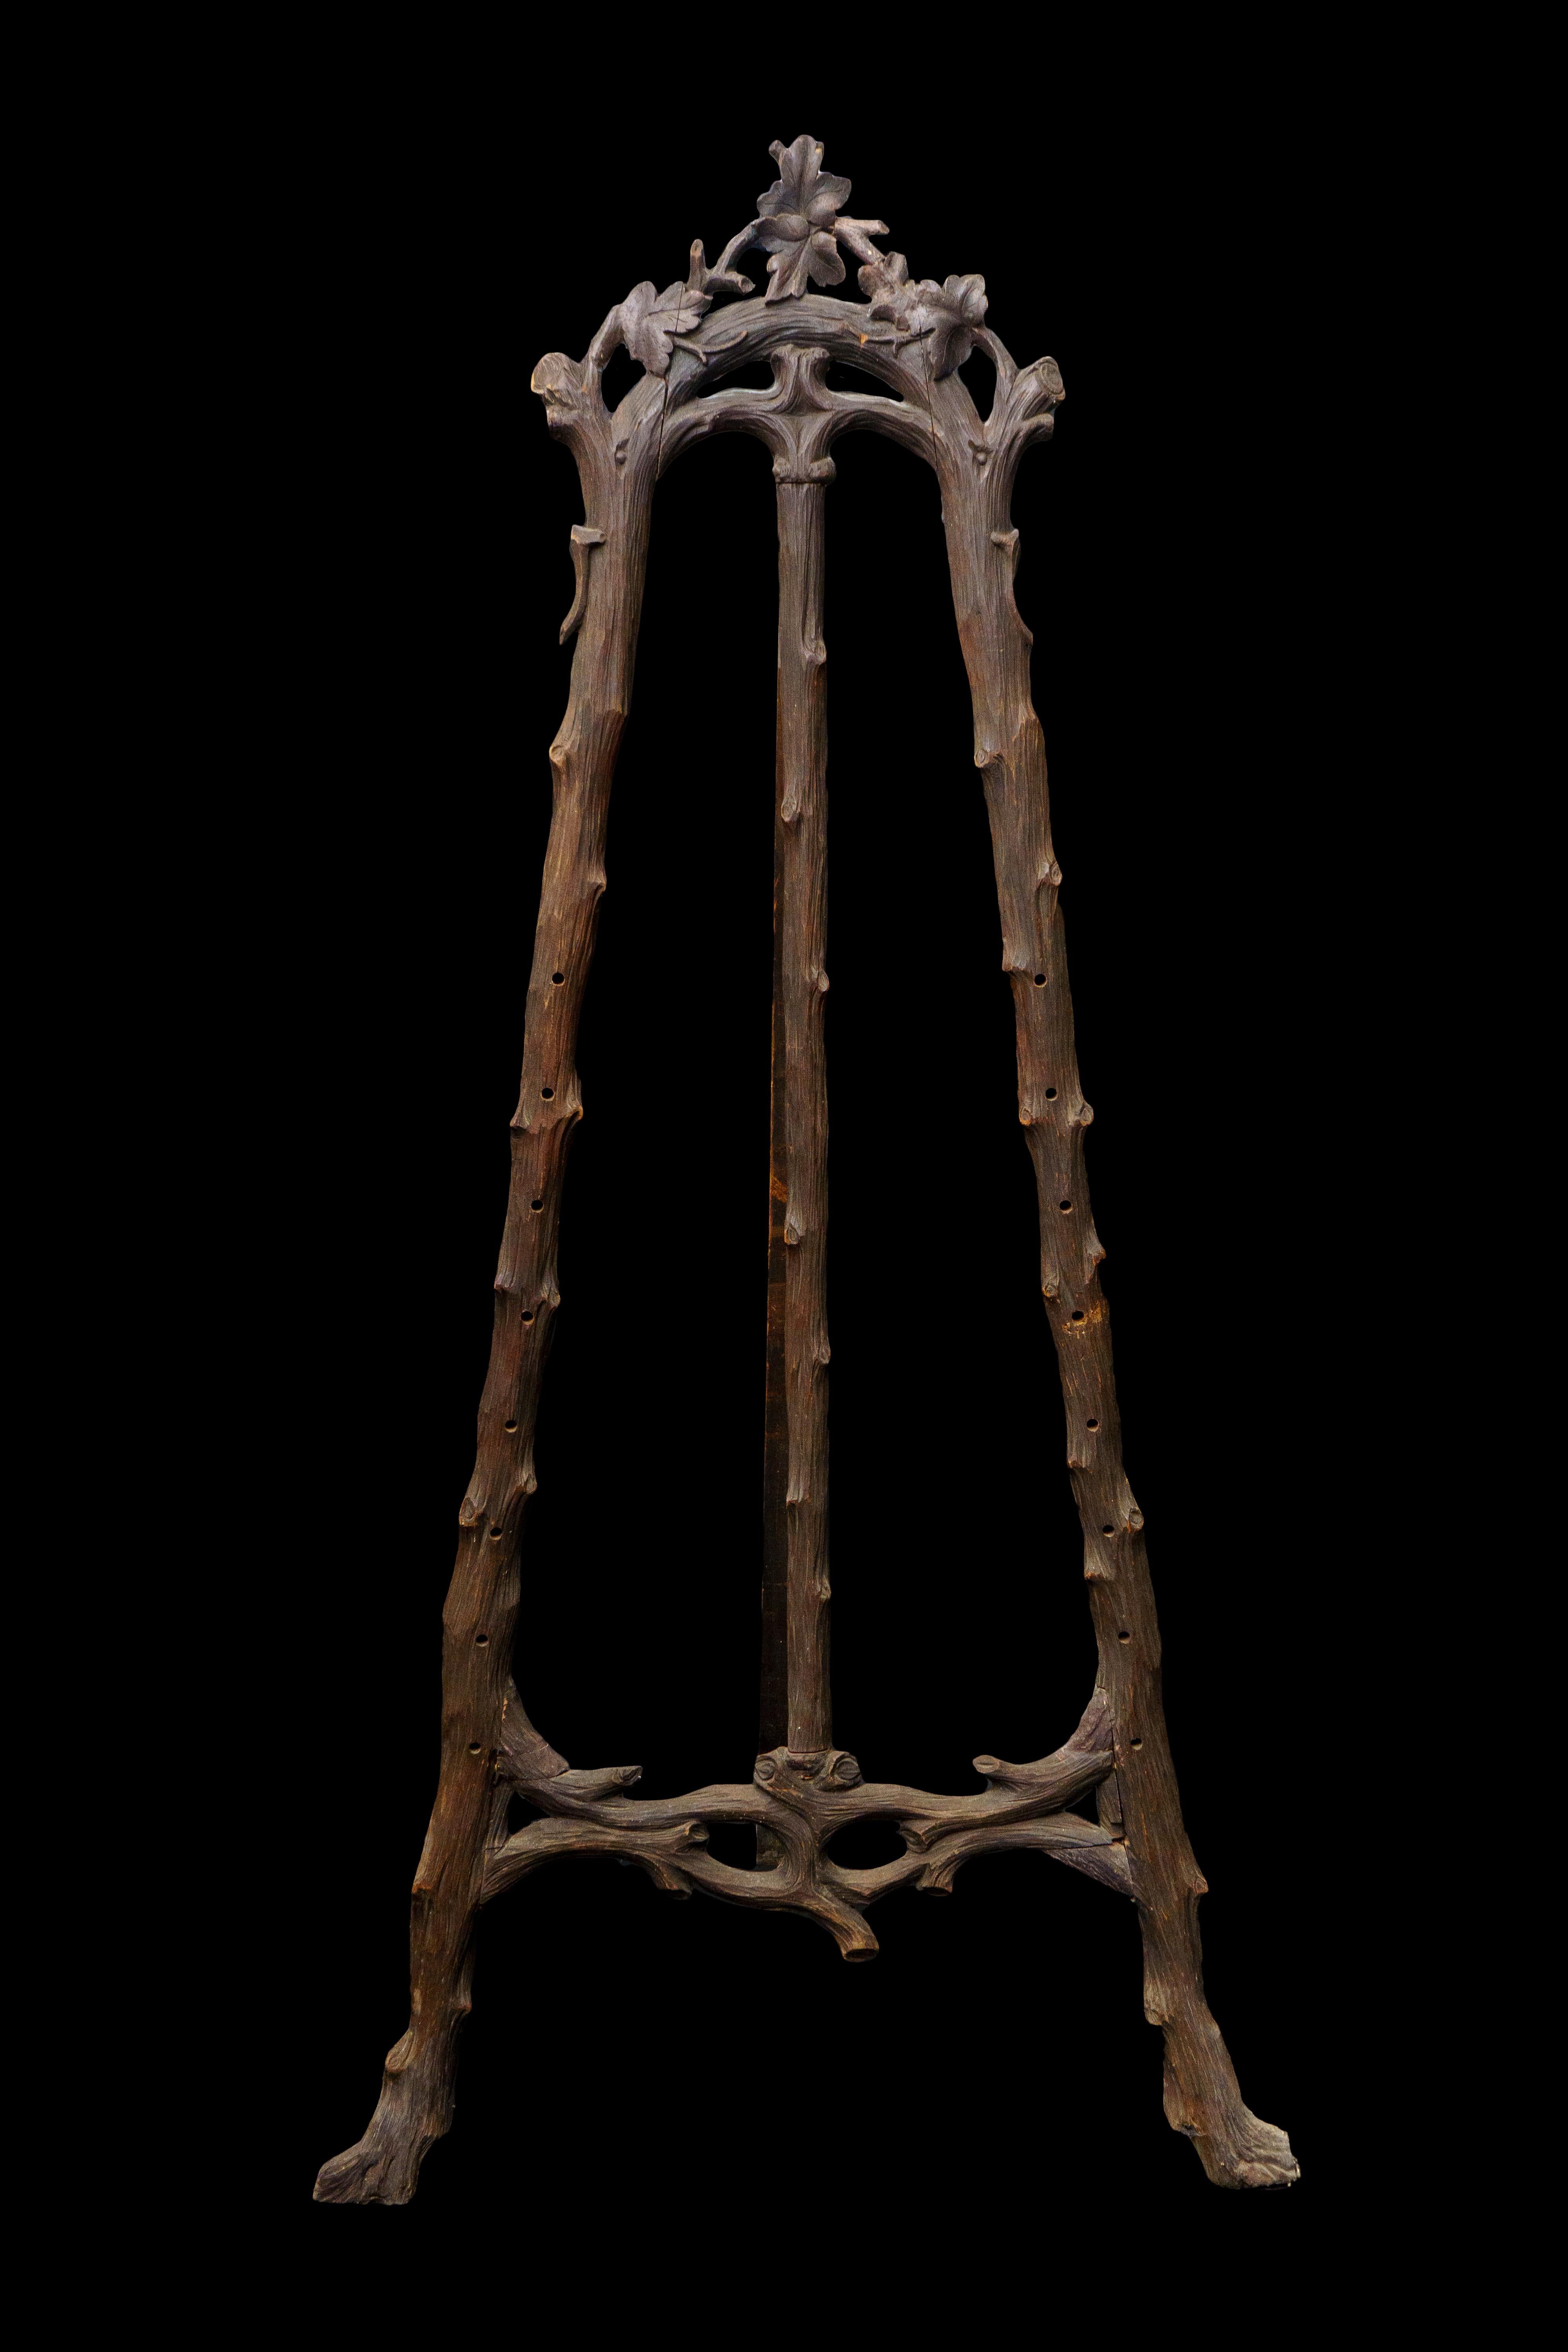 19th Century Black forest Easel. Beautifully carved branches and leaves make this the ideal way to display your most treasured painting.

Measures: 37